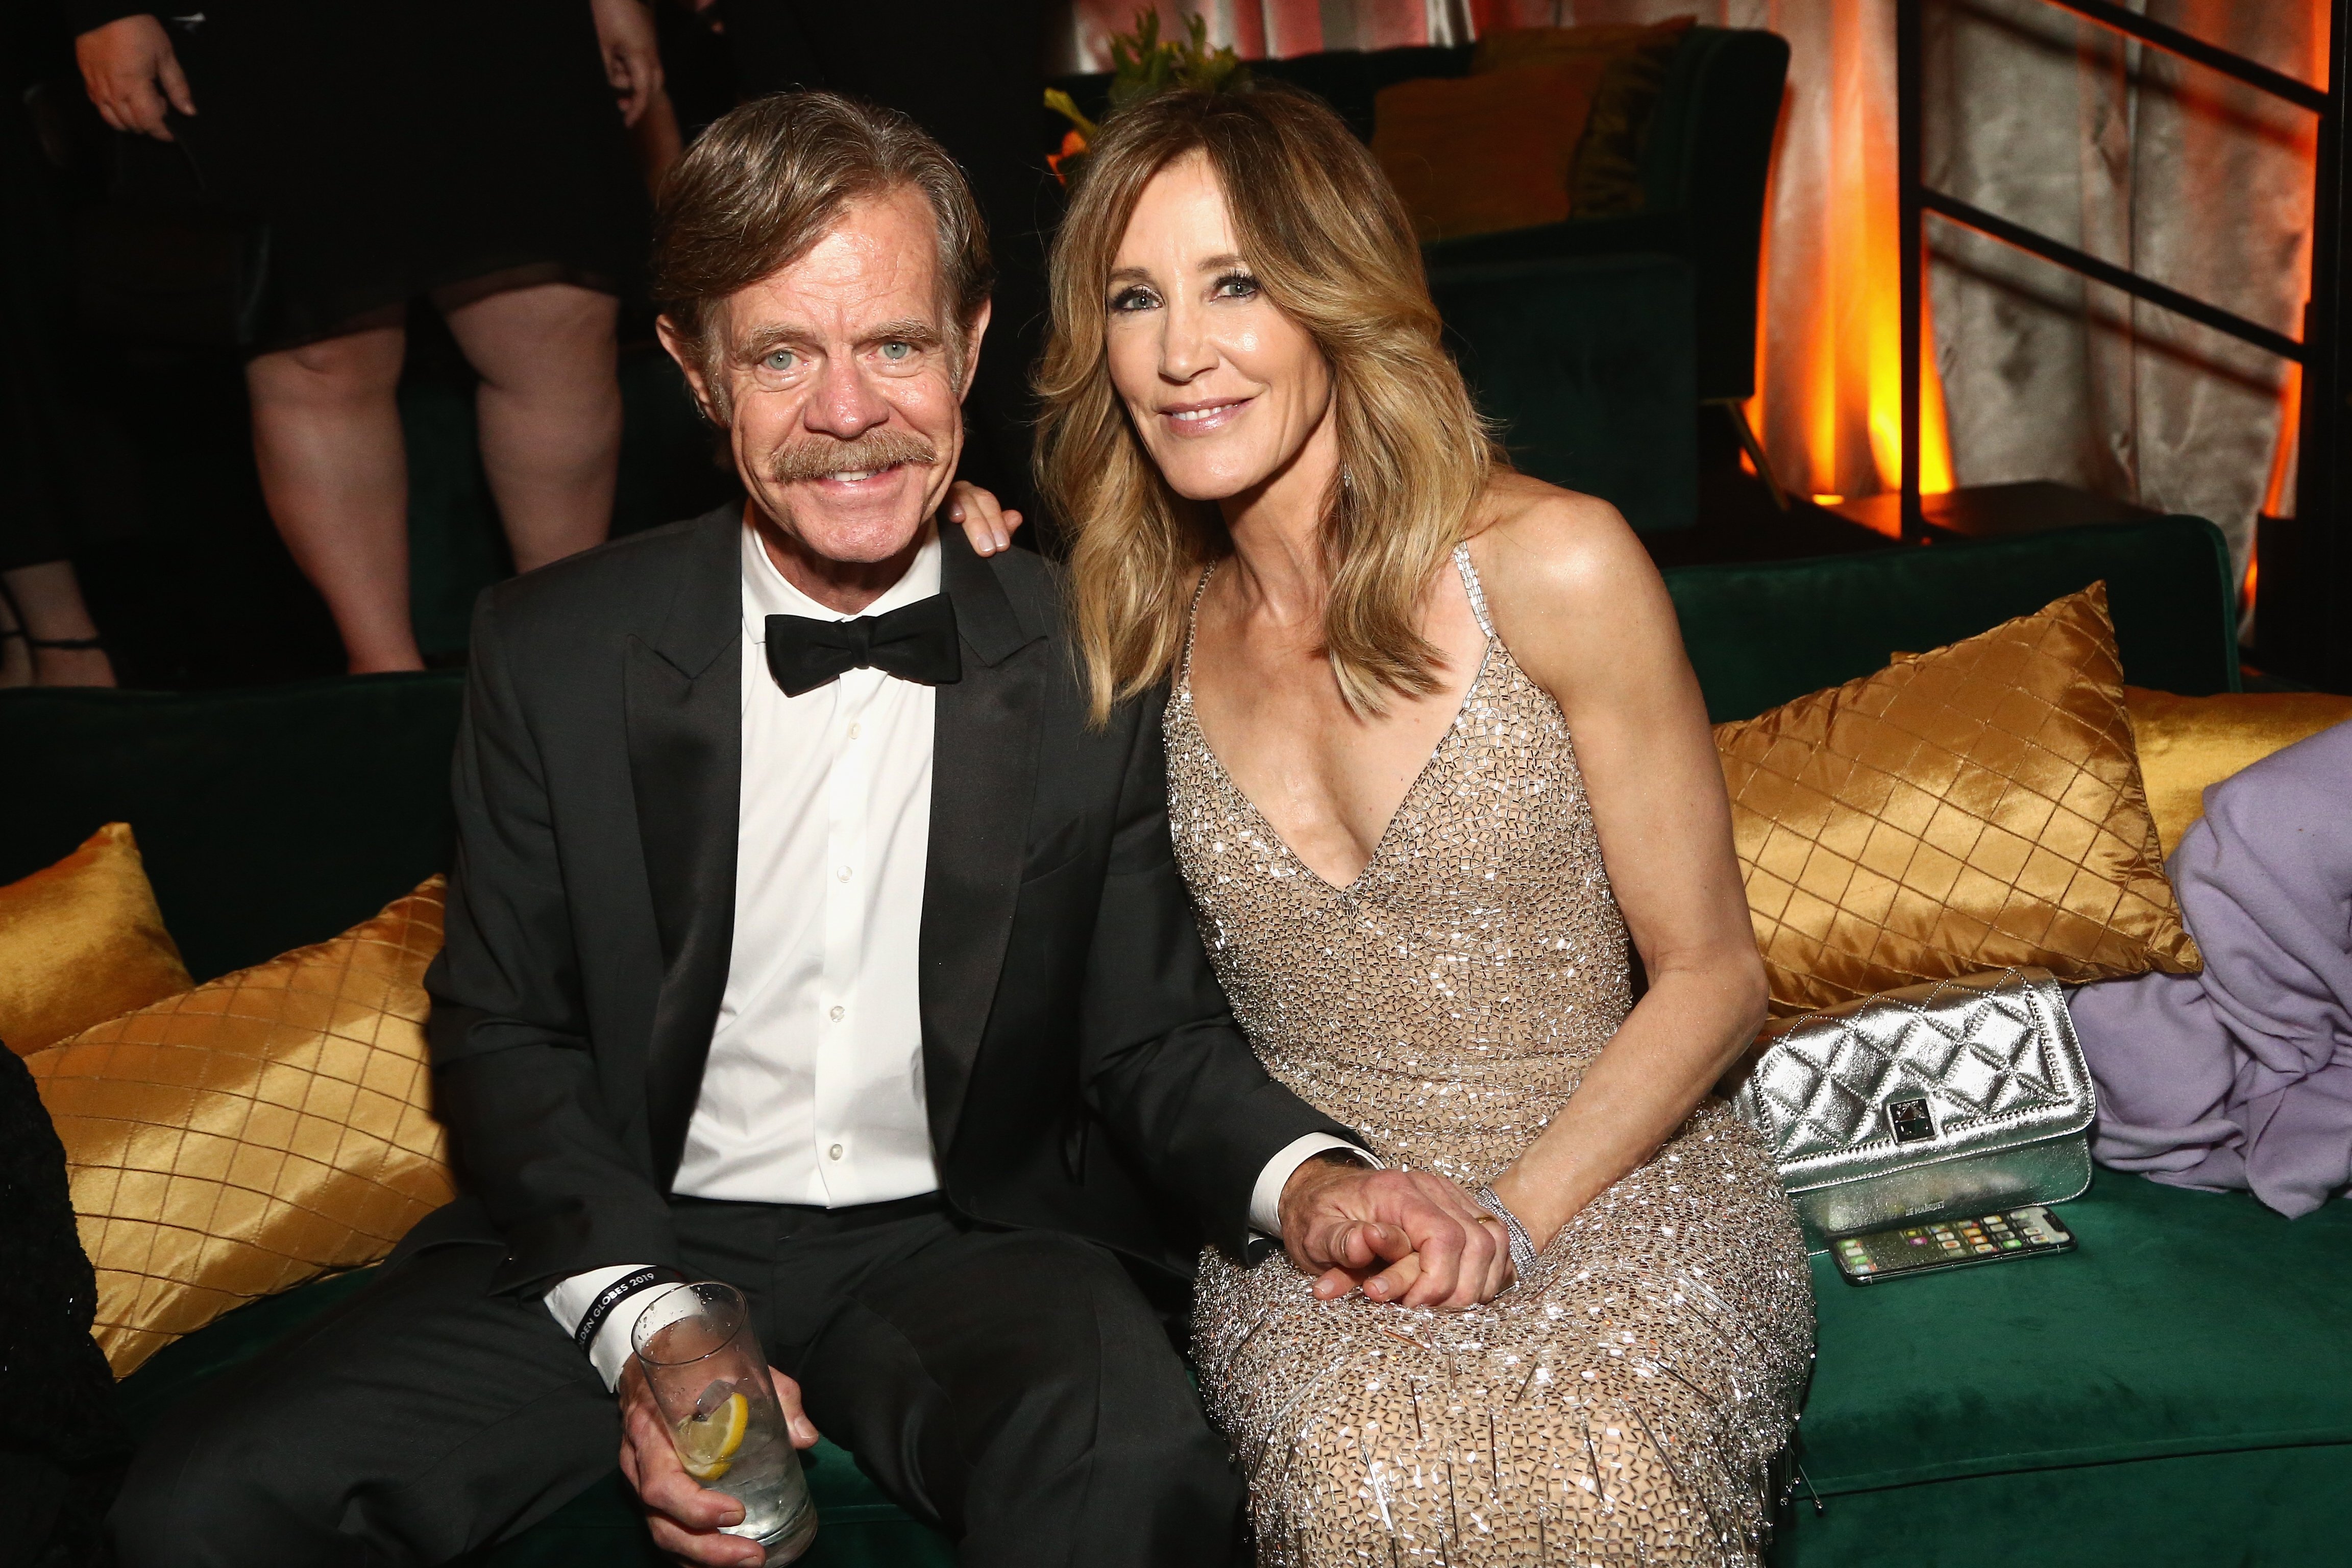 Felicity Huffman and William H. Macy at the Netflix 2019 Golden Globes After Party in Los Angeles, California | Photo: Getty Images